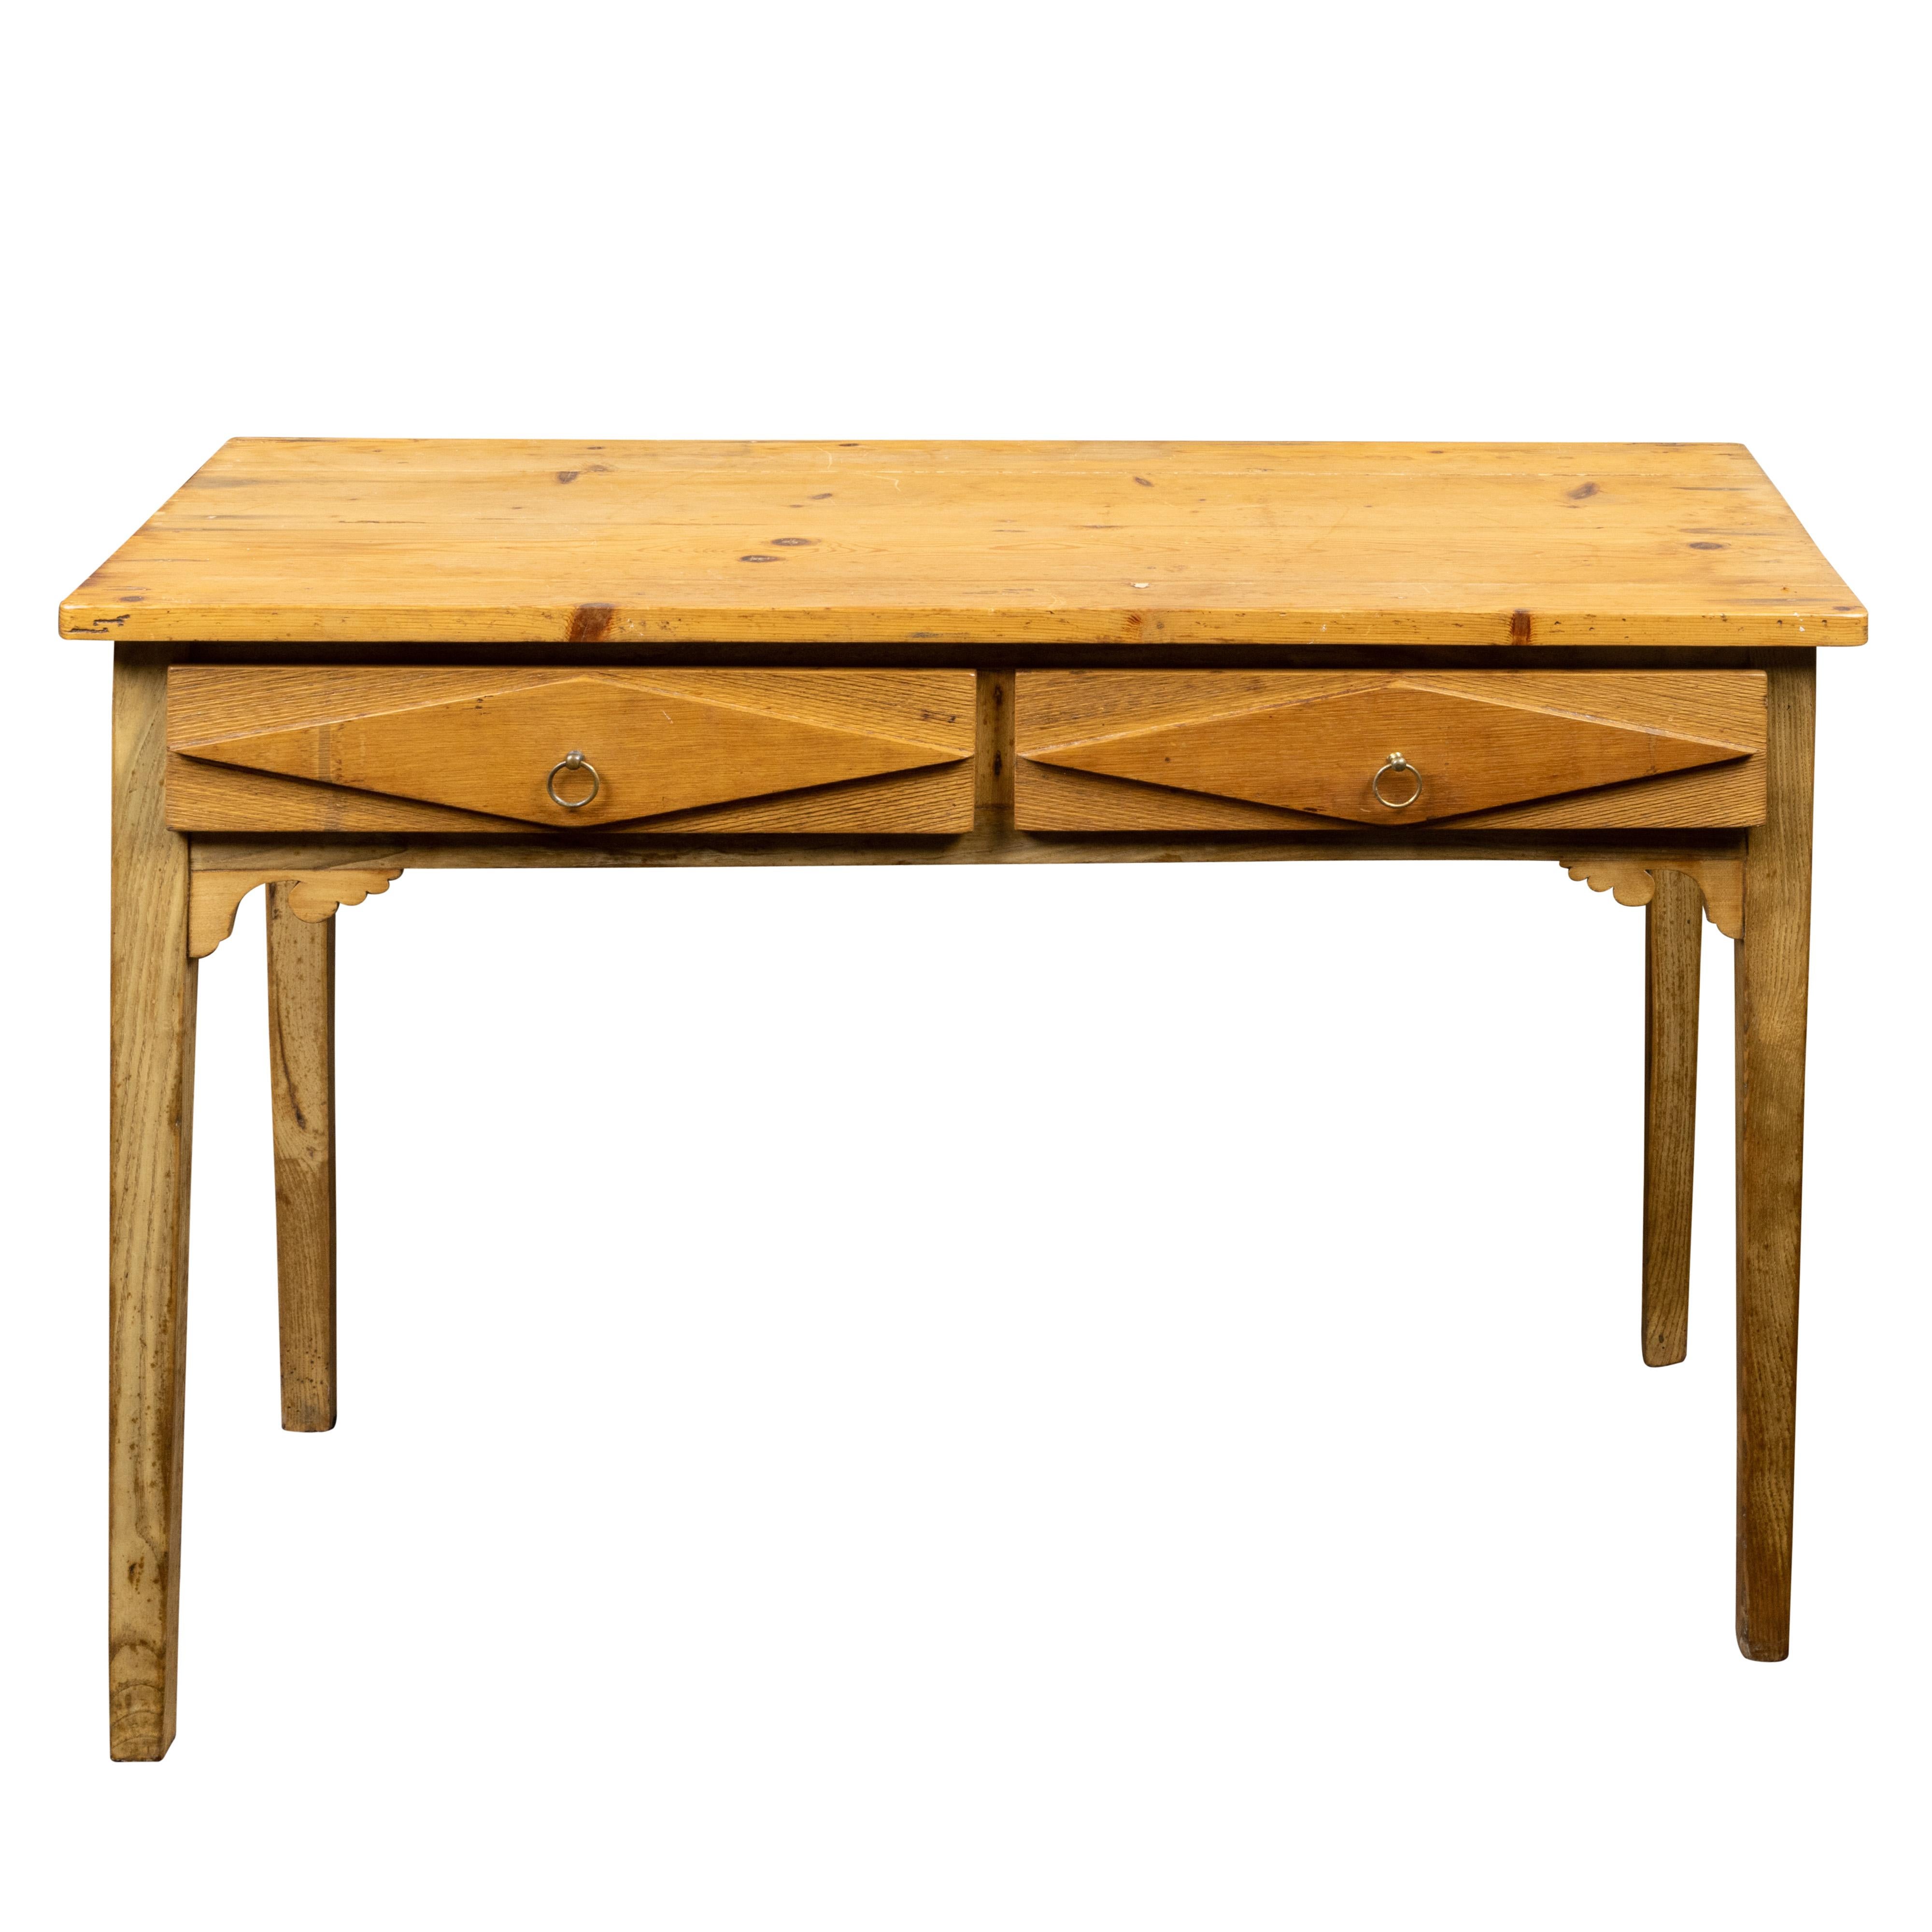 French 20th Century Pine Desk with Two Drawers and Raised Diamond Motifs